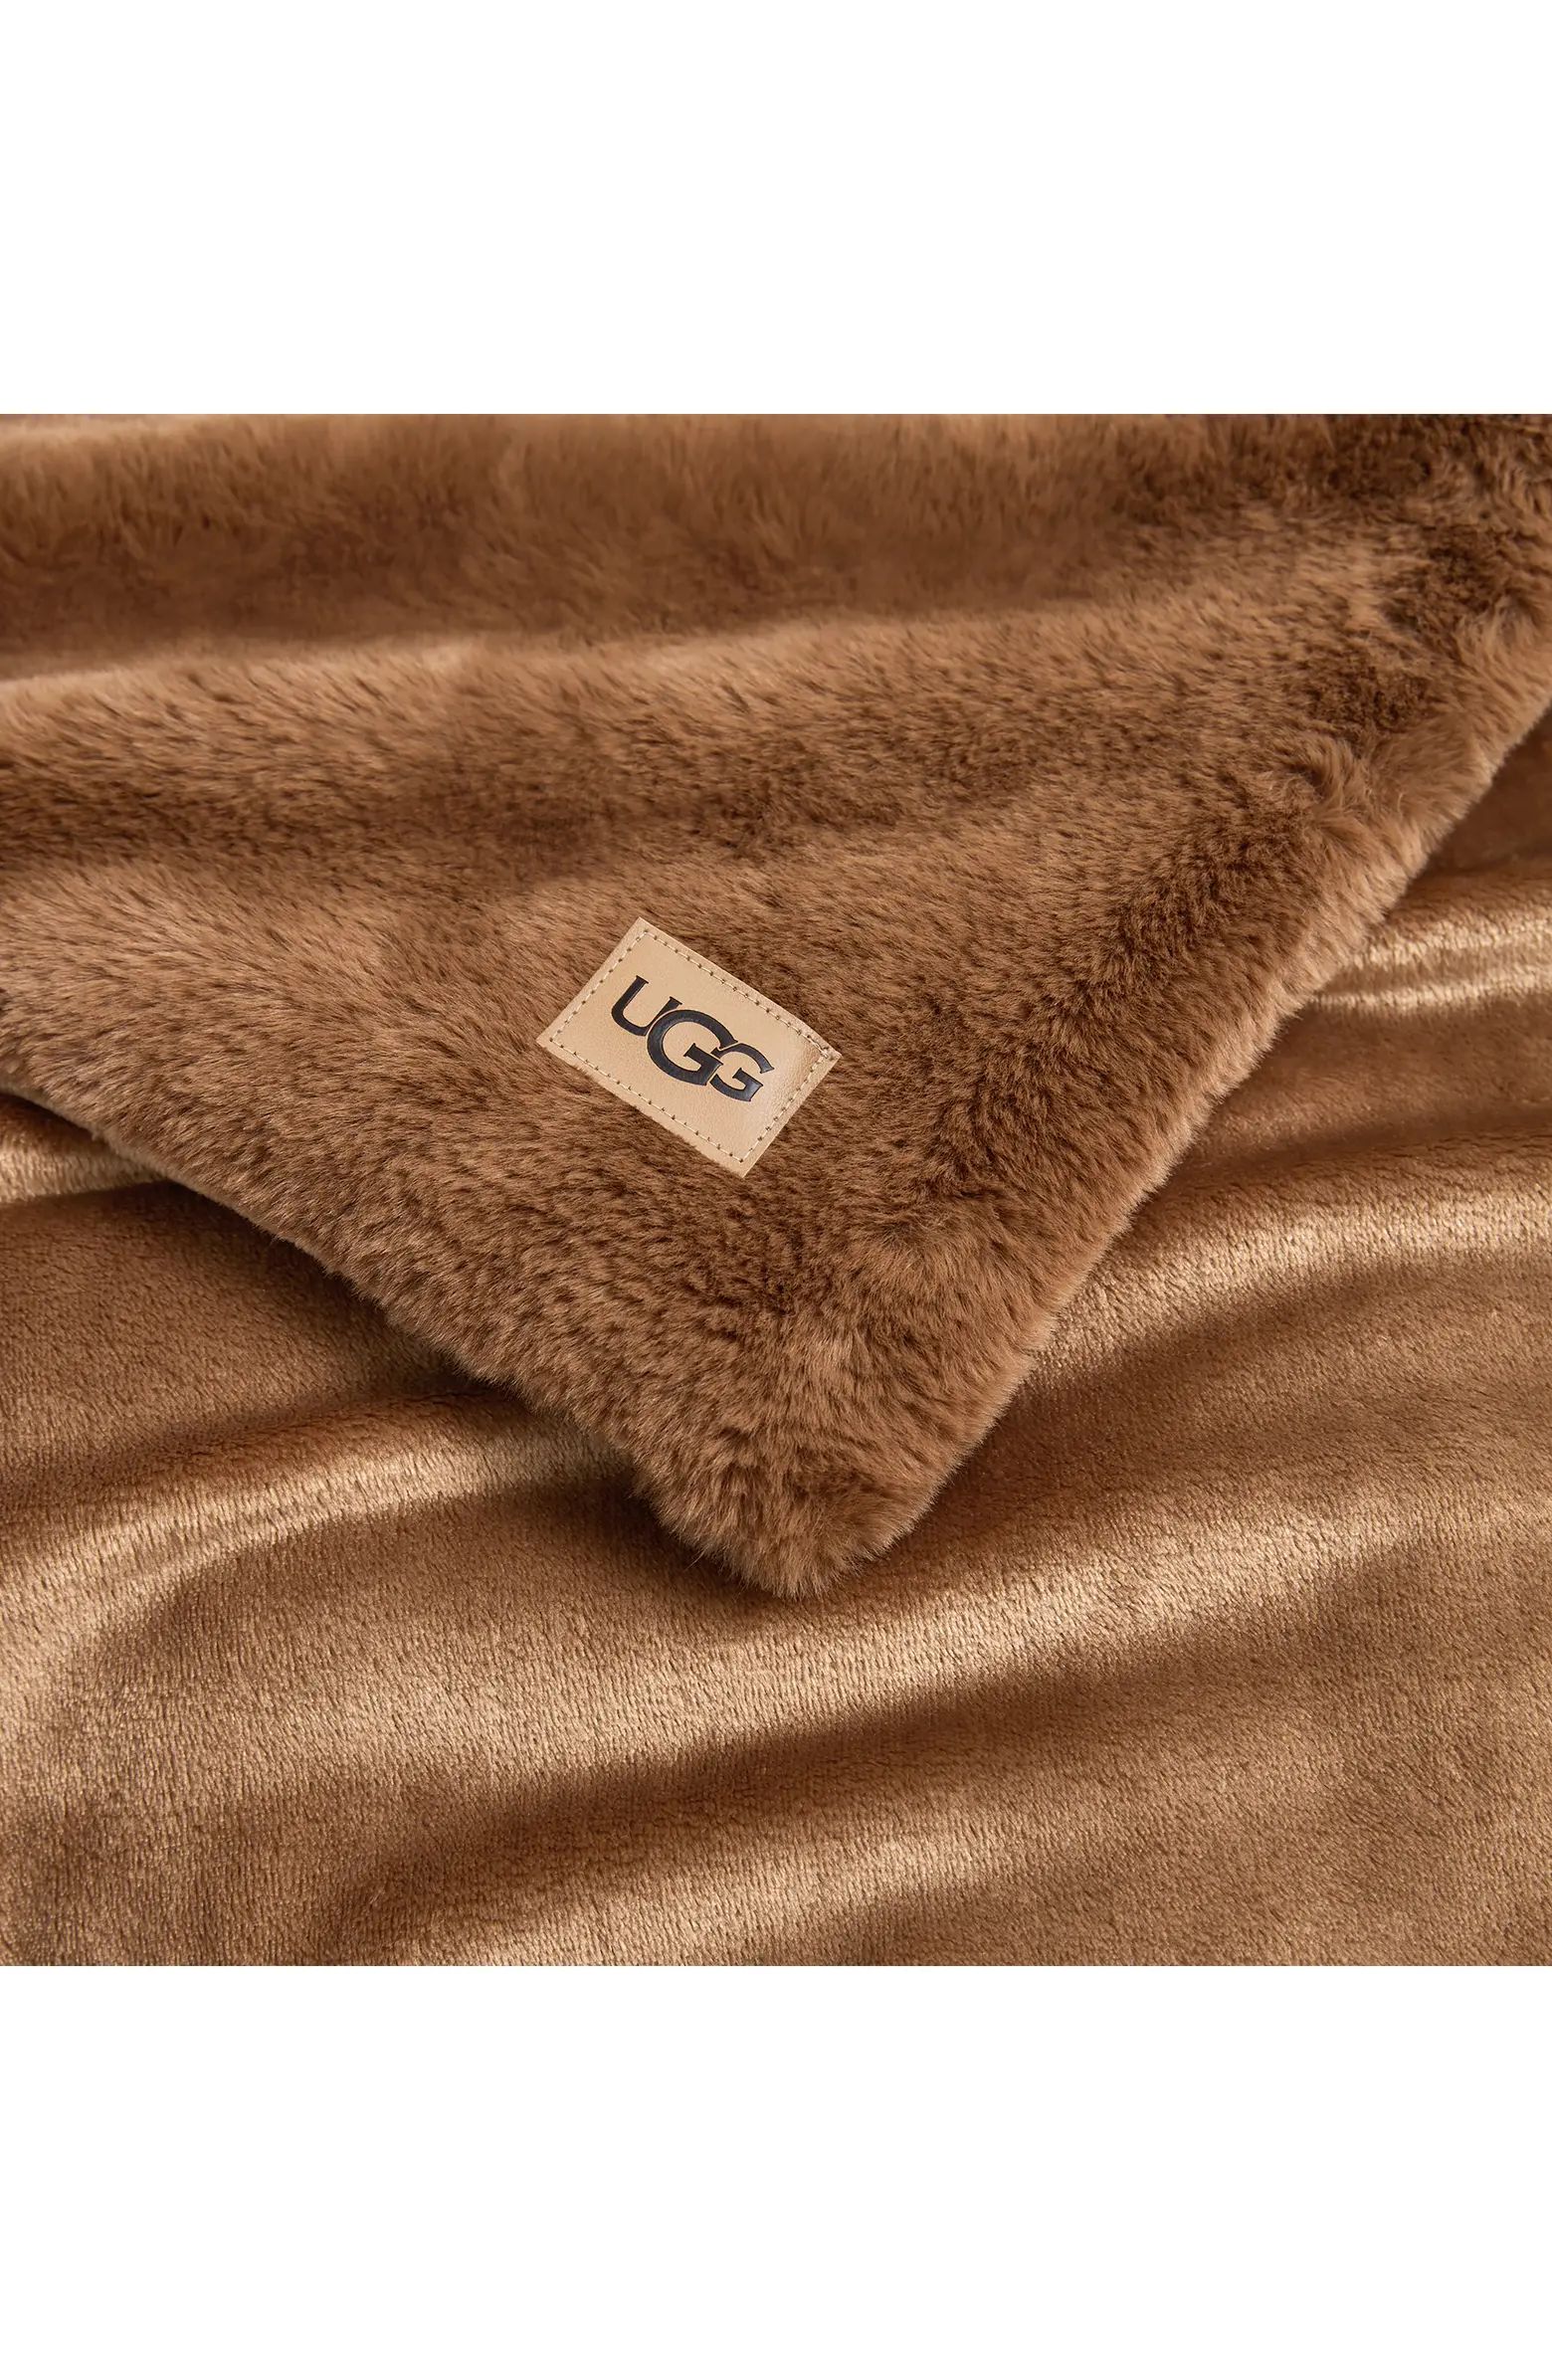 Two different kinds of cozy—flannel and plush—warm this throw that's so irresistibly soft you... | Nordstrom